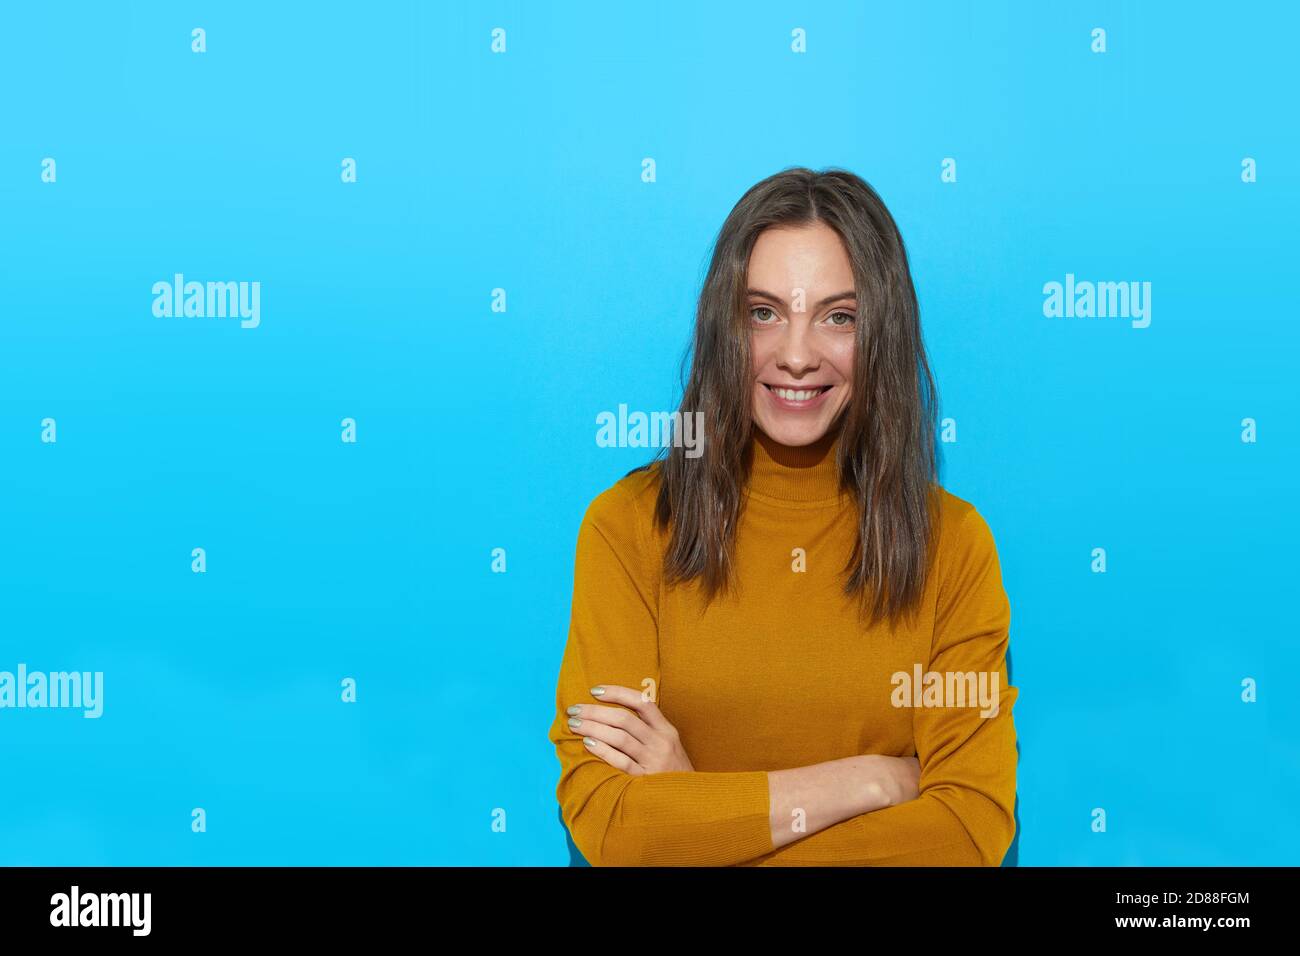 Smiling woman with crossed arms in studio Stock Photo